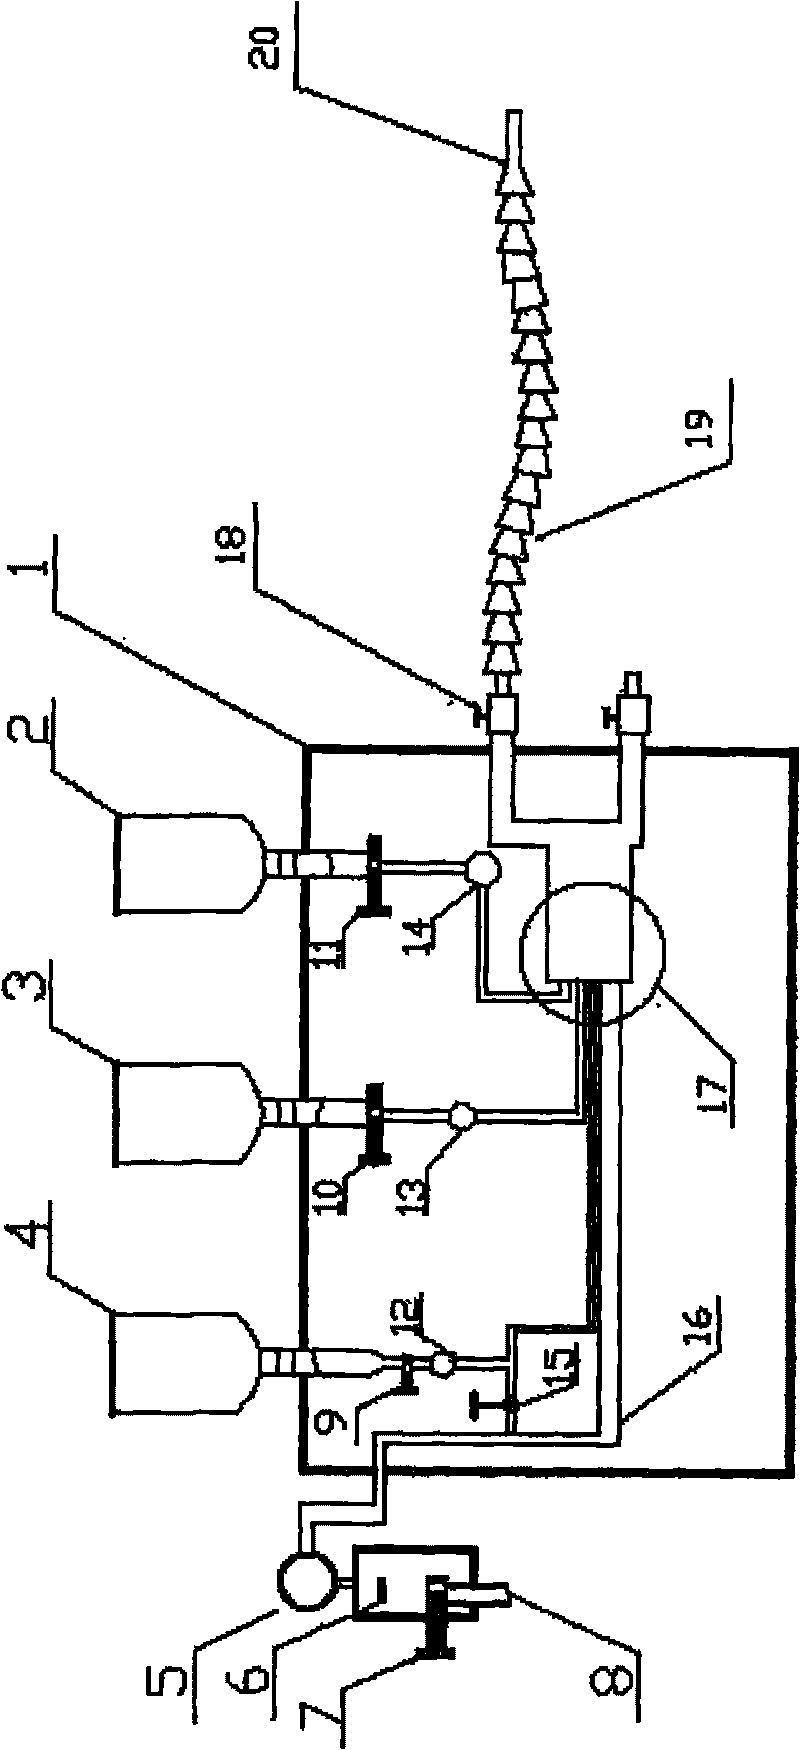 Process and equipment for grinding nanometer fluid